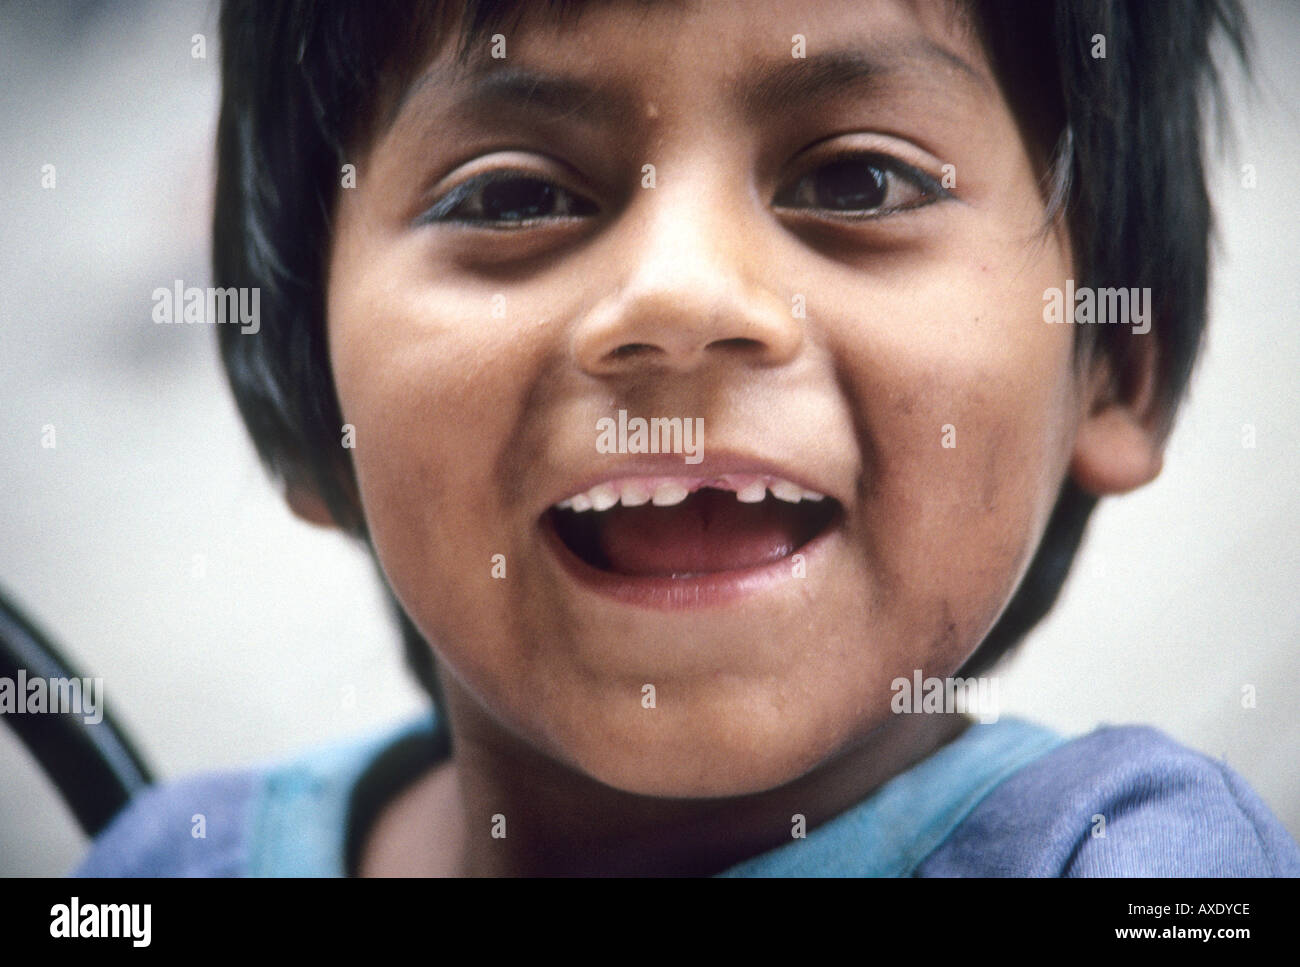 Mexican boy smiling Stock Photo - Alamy